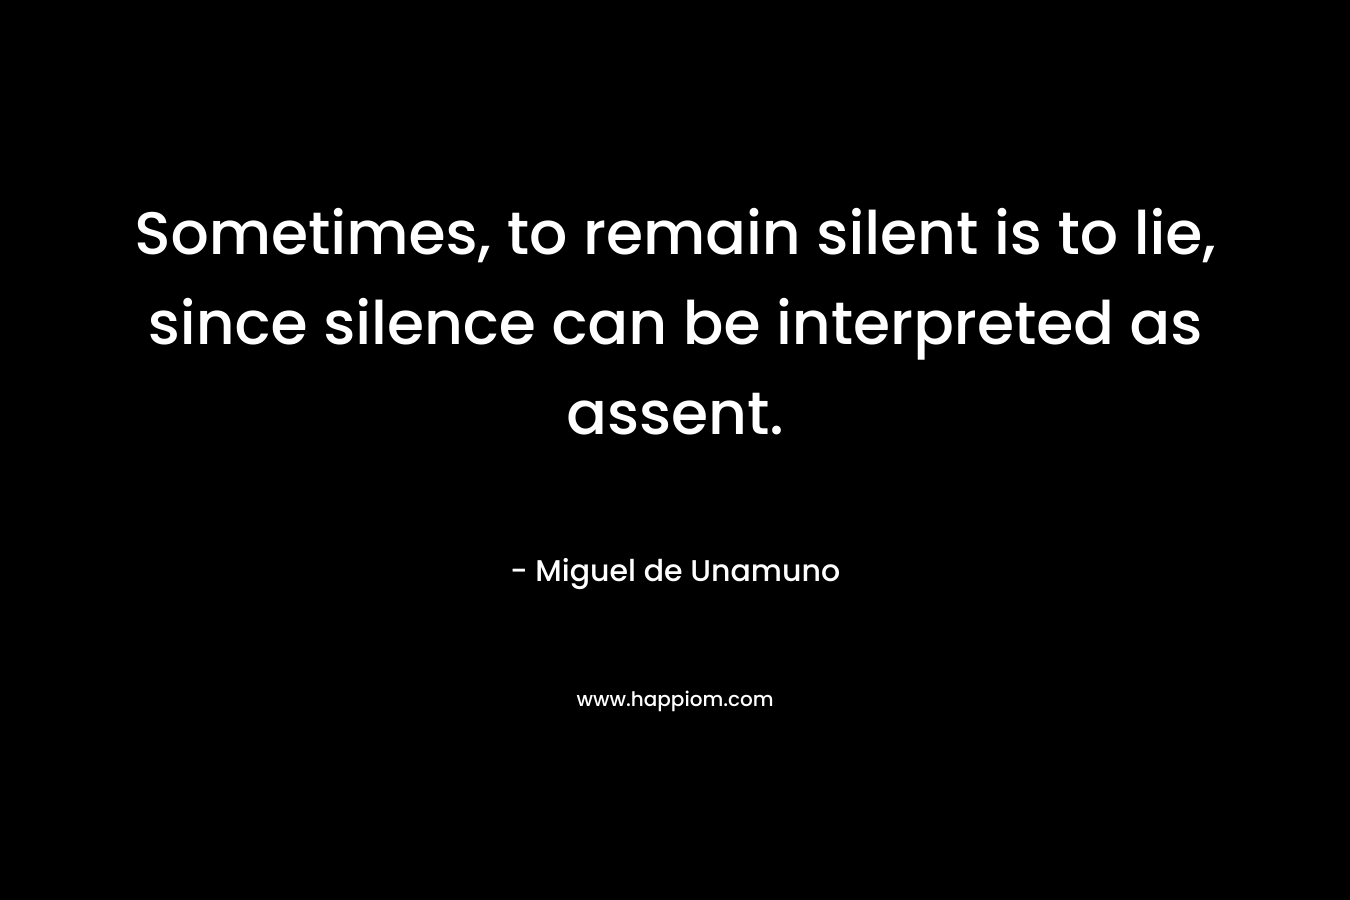 Sometimes, to remain silent is to lie, since silence can be interpreted as assent. – Miguel de Unamuno